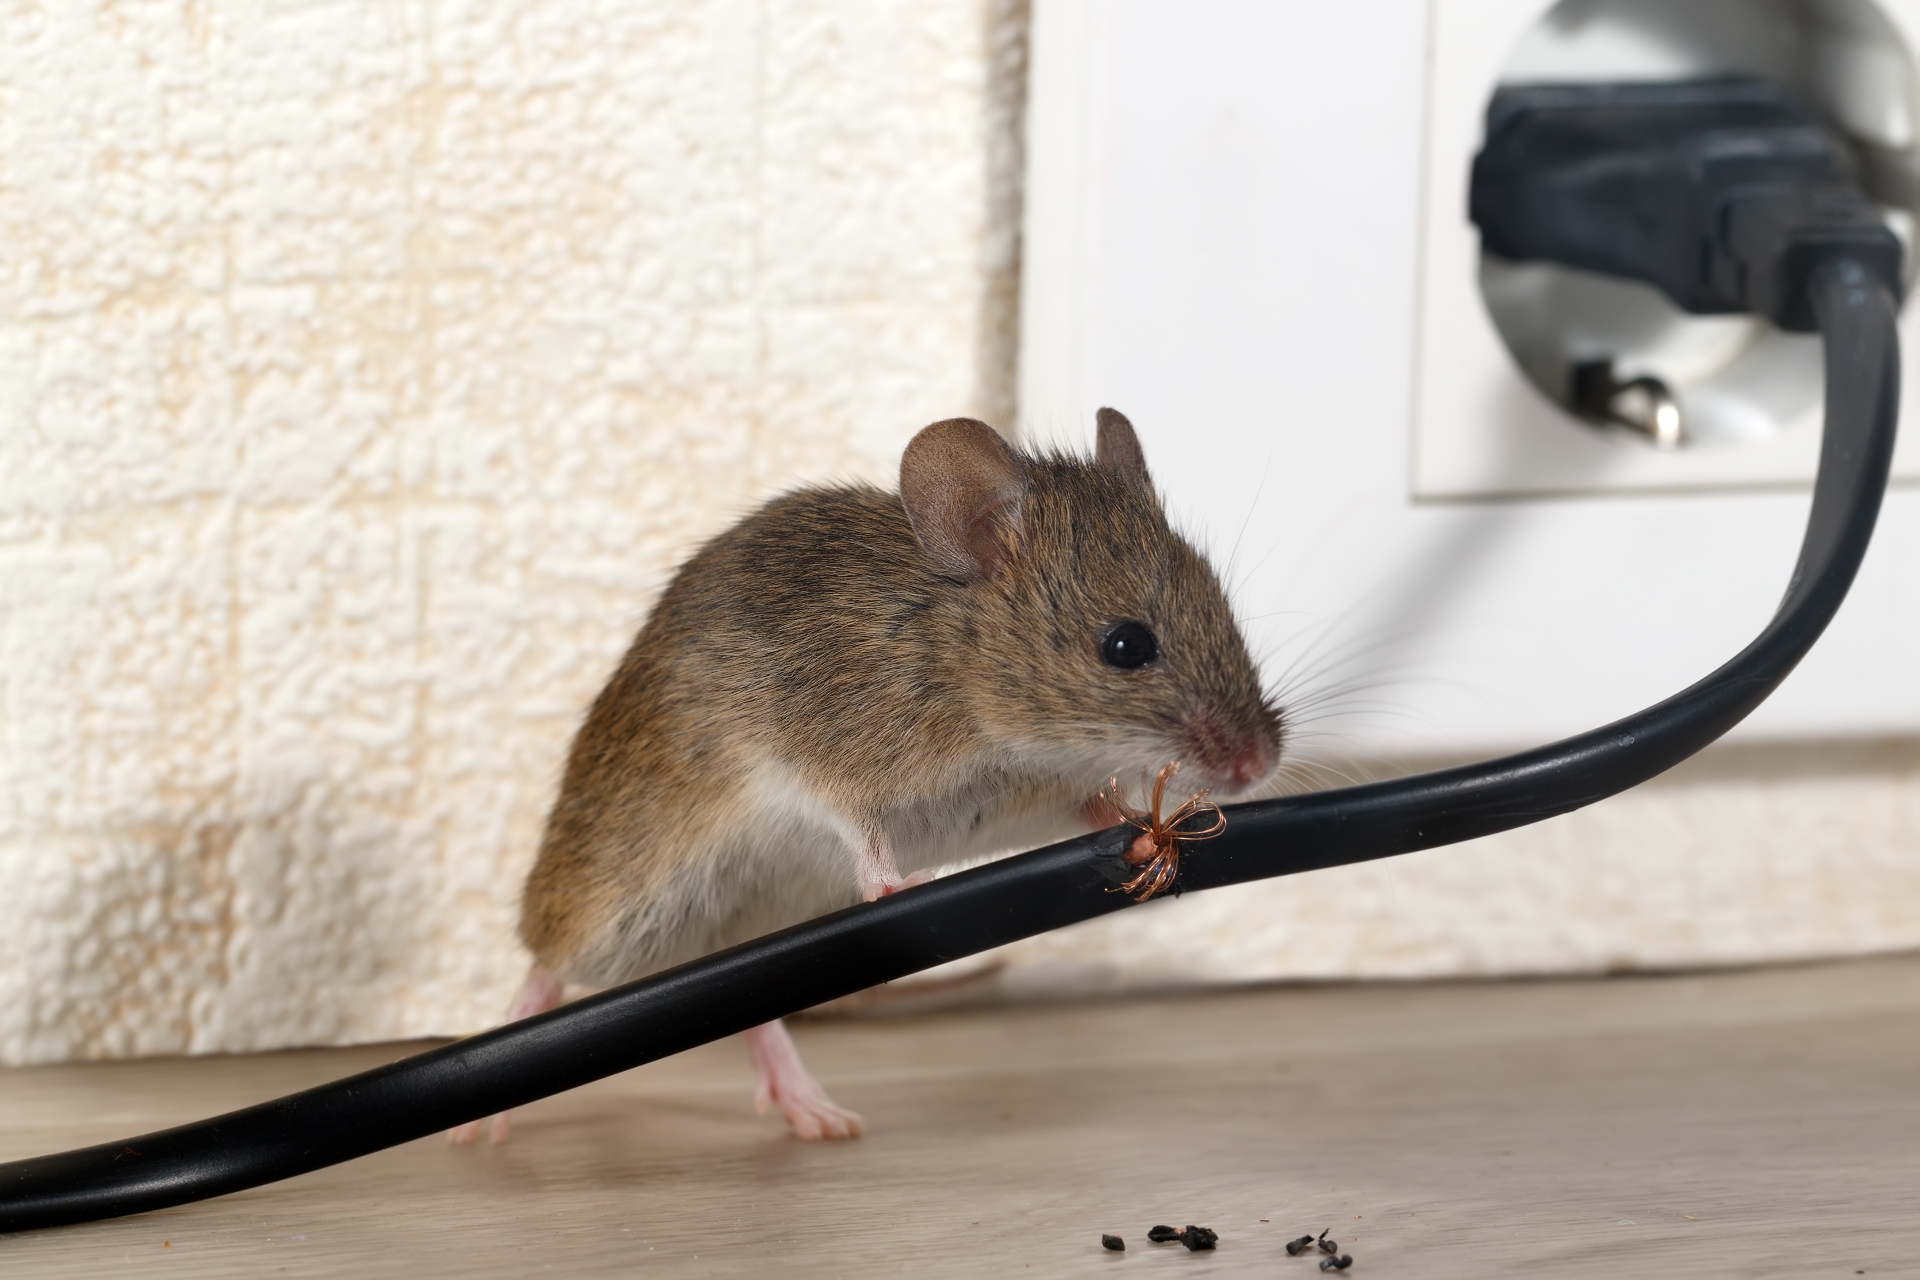 Mice Infestation, Pest Control in Tolworth, Berrylands, KT5. Call Now 020 8166 9746